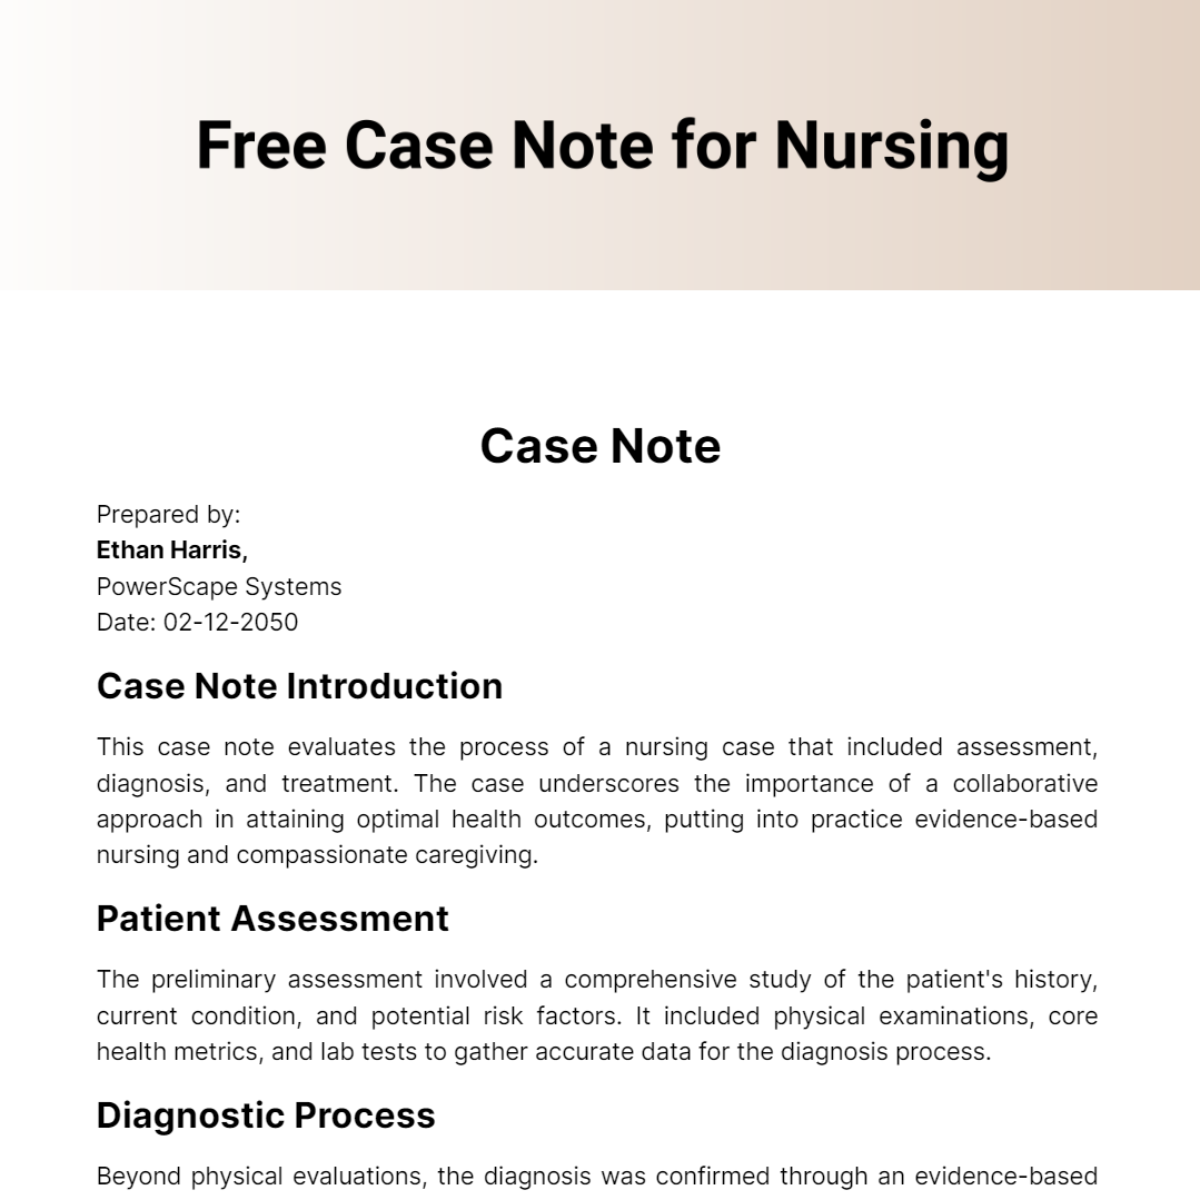 Free Case Note for Nursing Template